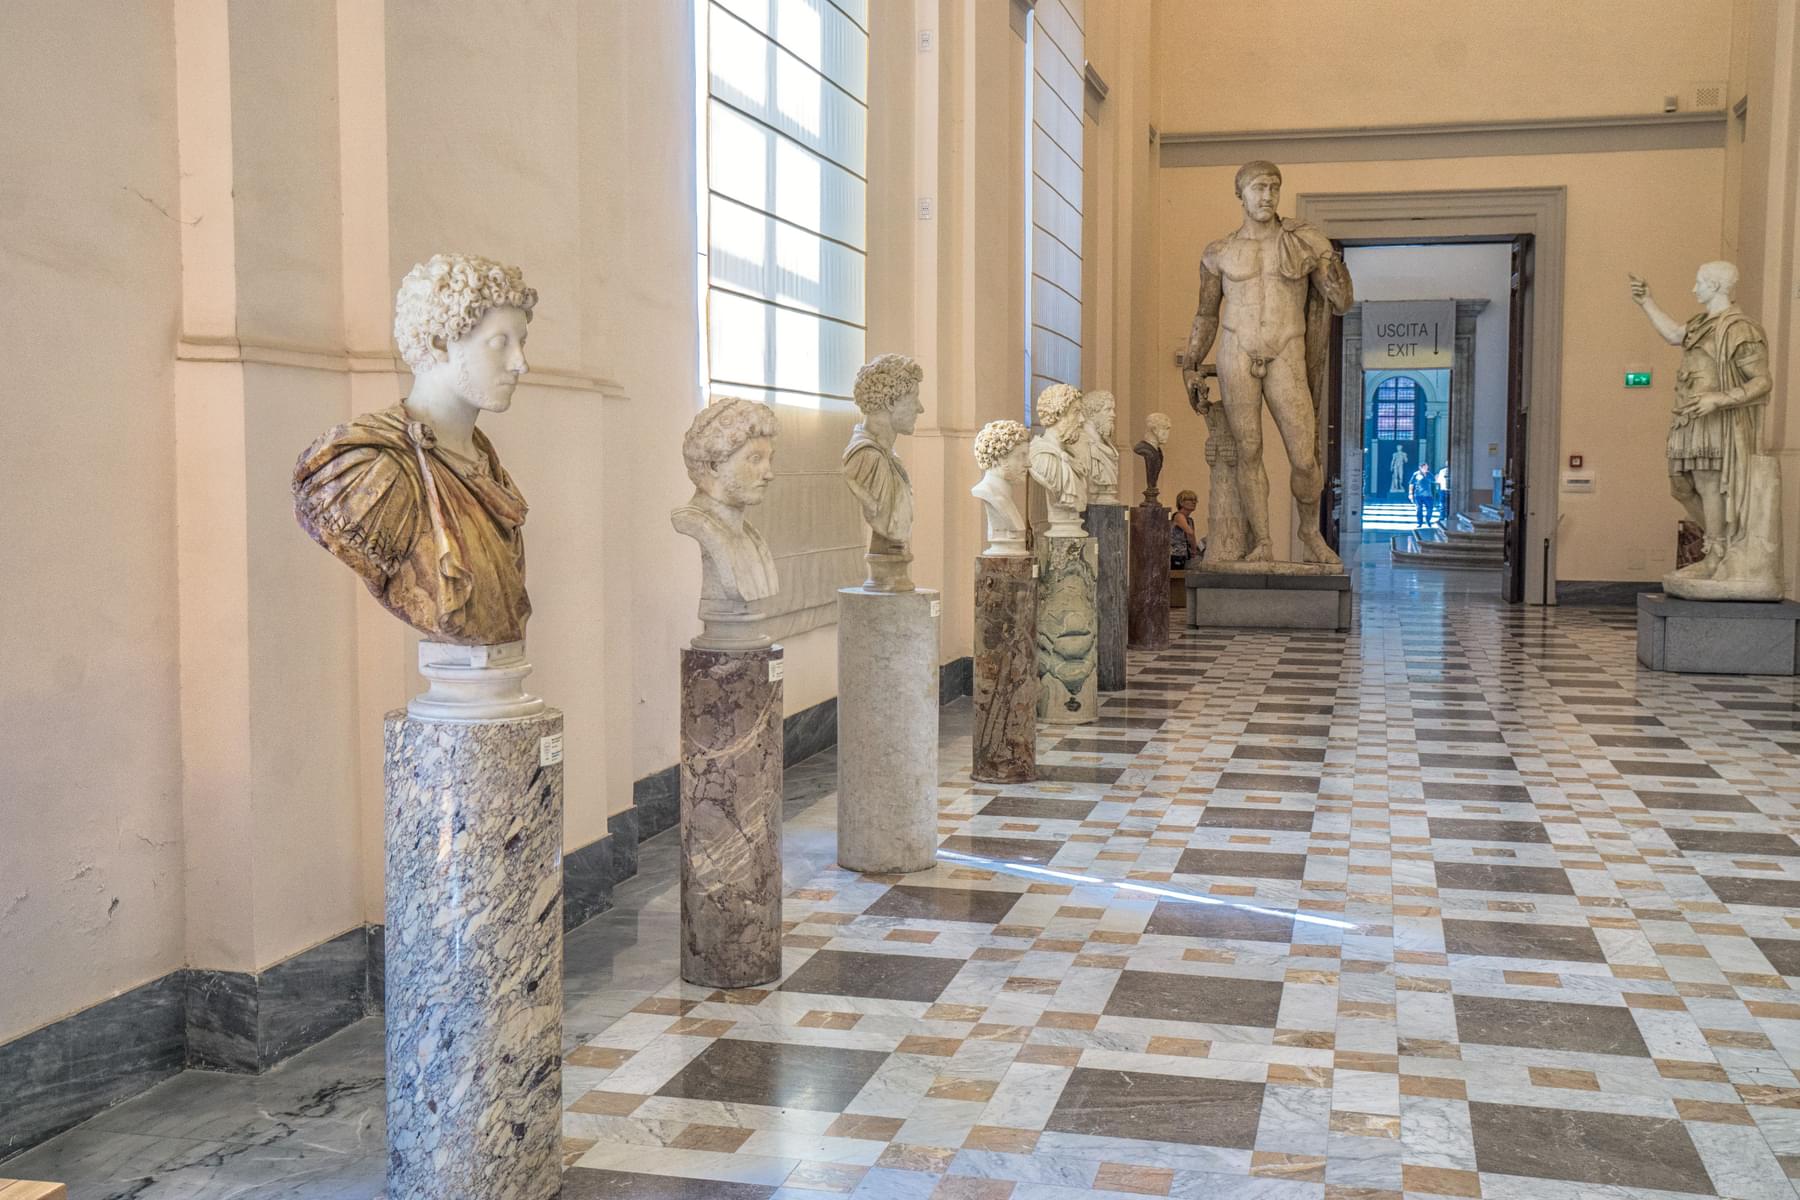 Visit Naples National Archaeological Museum